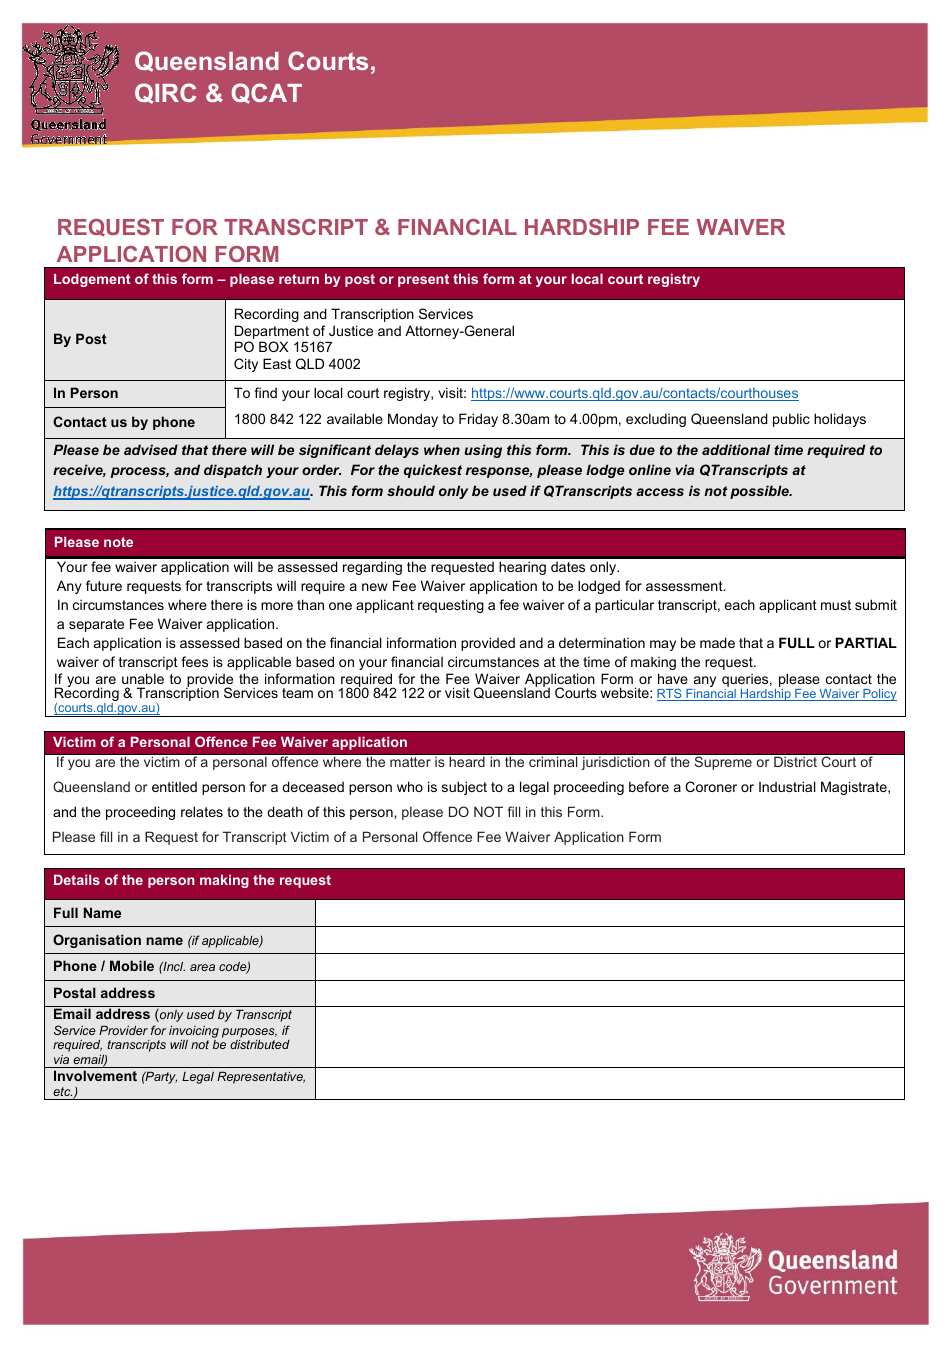 Request for Transcript  Financial Hardship Fee Waiver Application Form - Queensland, Australia, Page 1